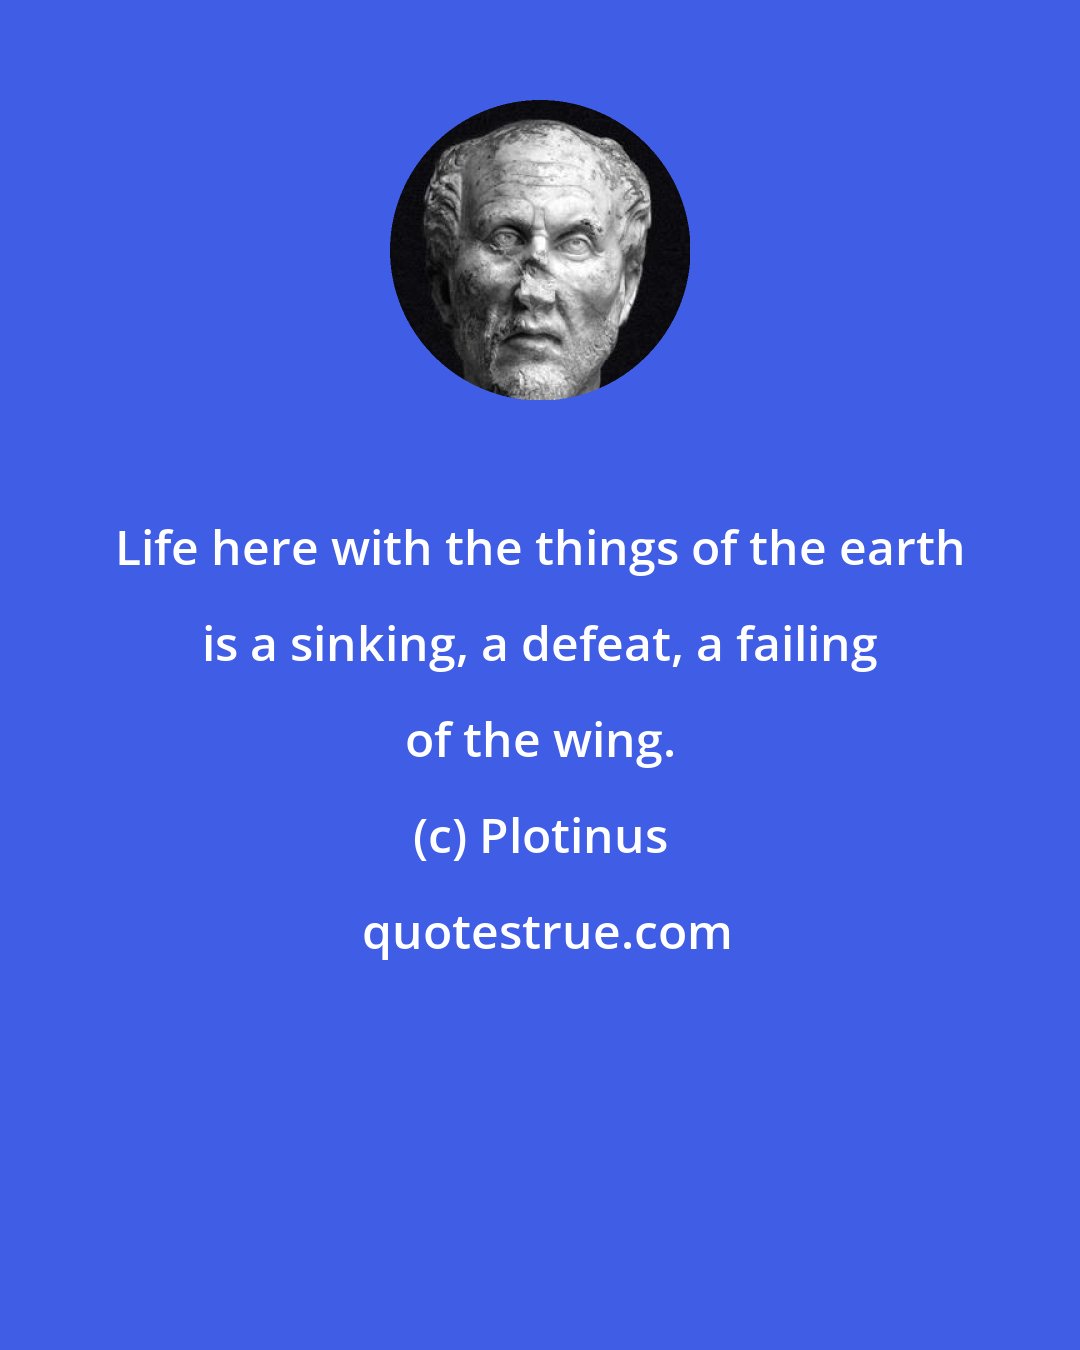 Plotinus: Life here with the things of the earth is a sinking, a defeat, a failing of the wing.